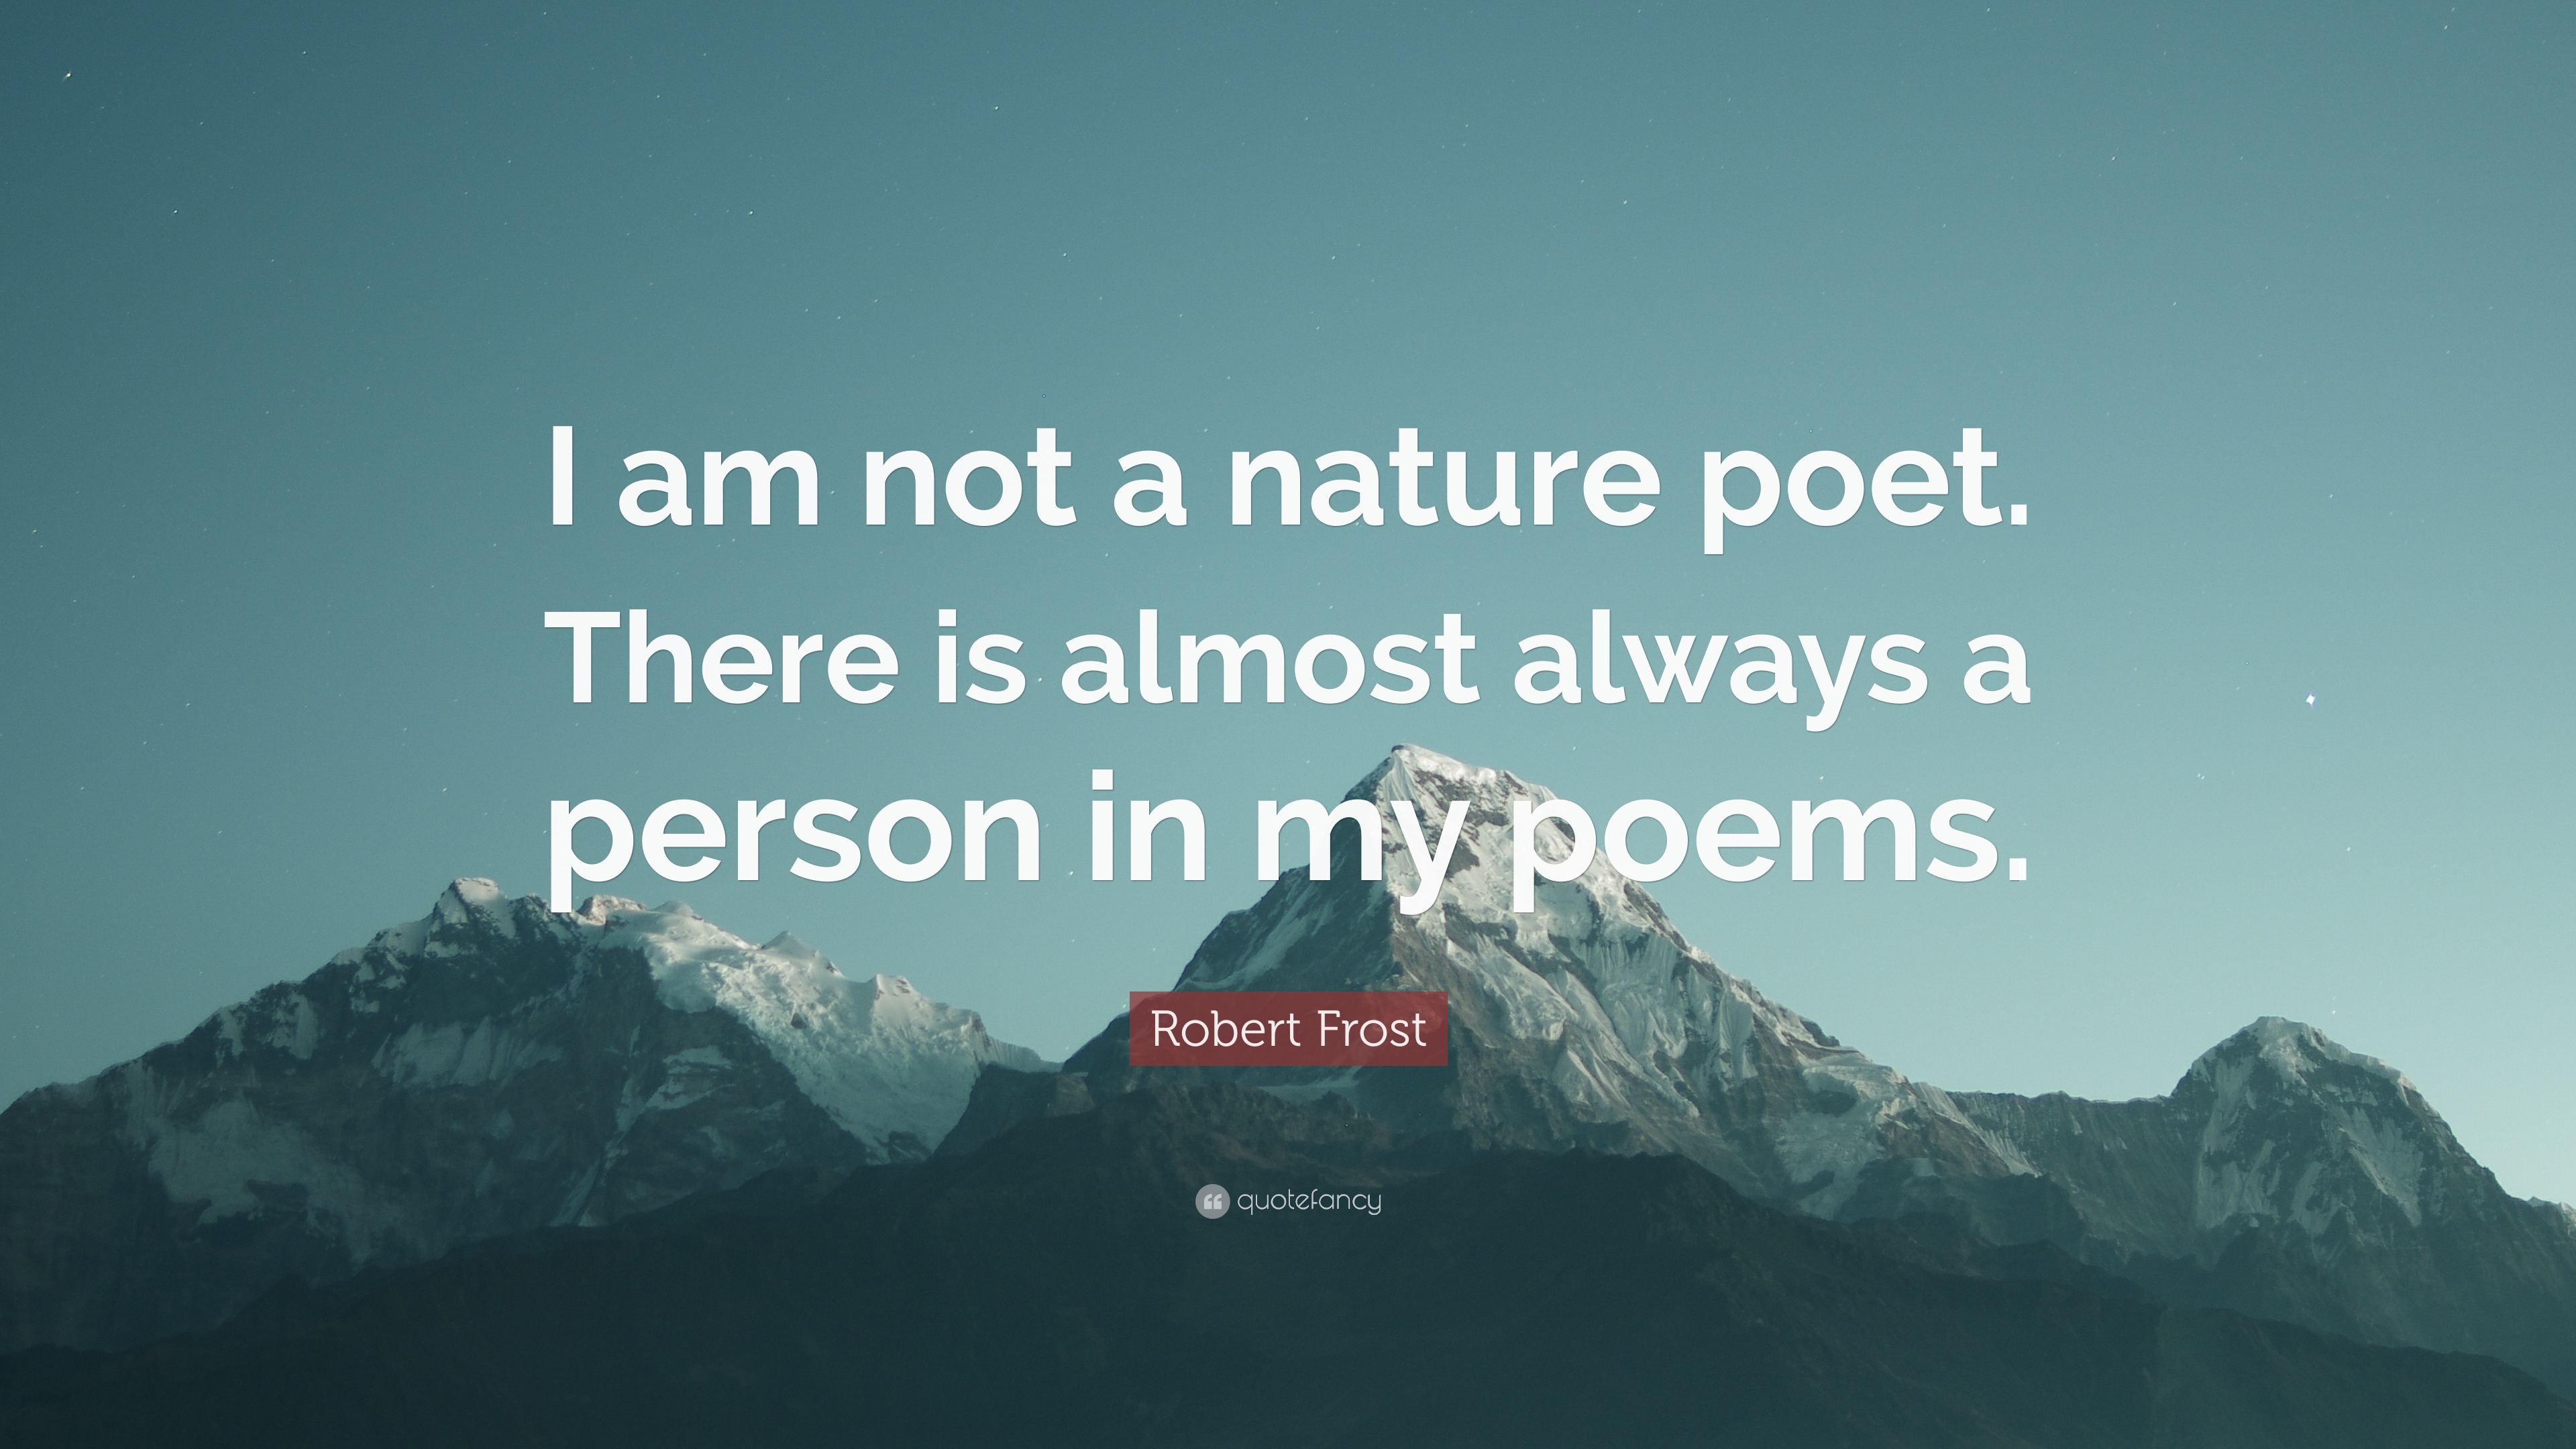 Frost Quote: “I am not a nature poet. almost always a person